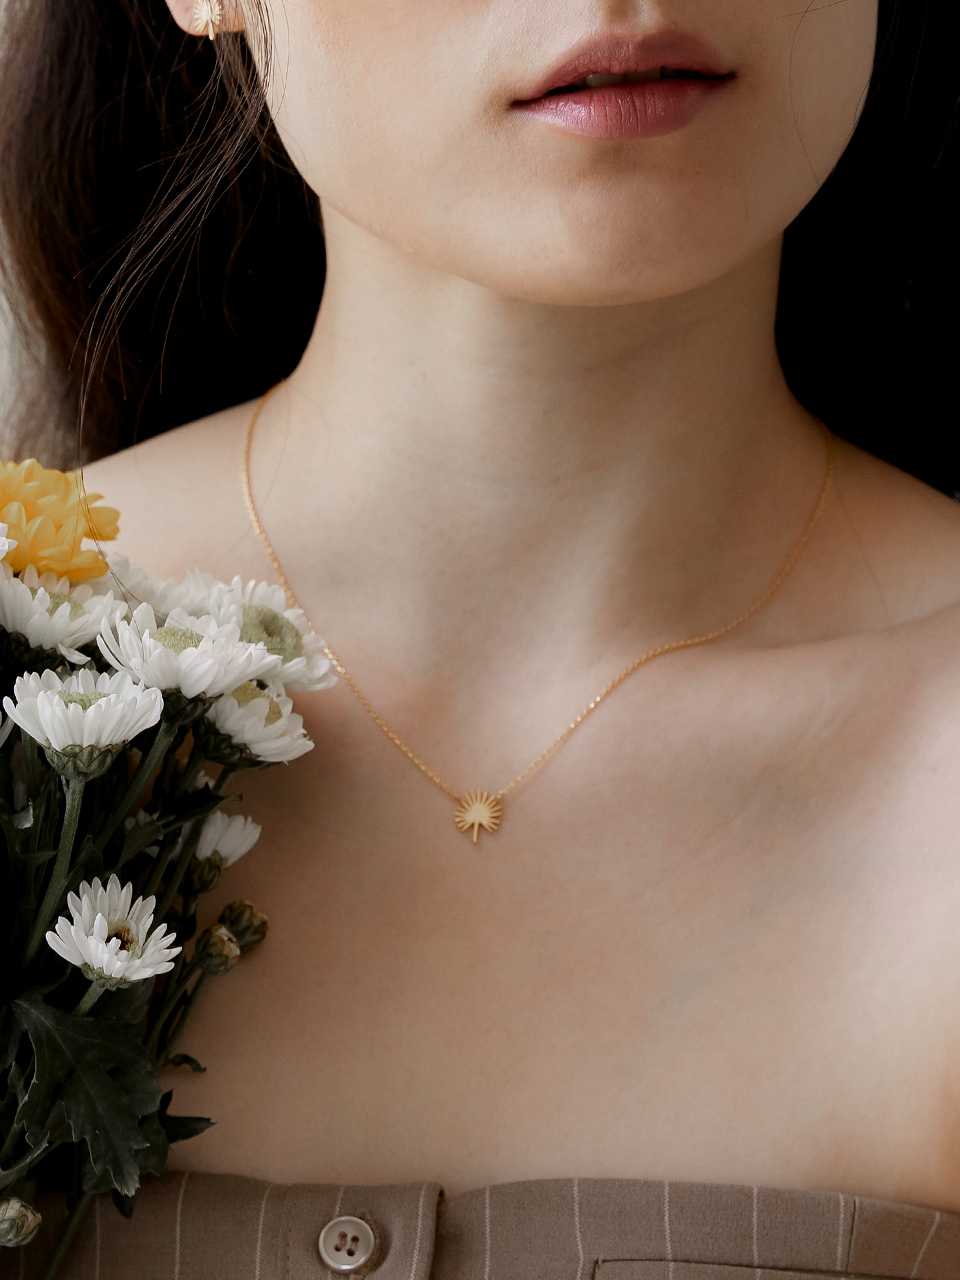 Floral seed necklace